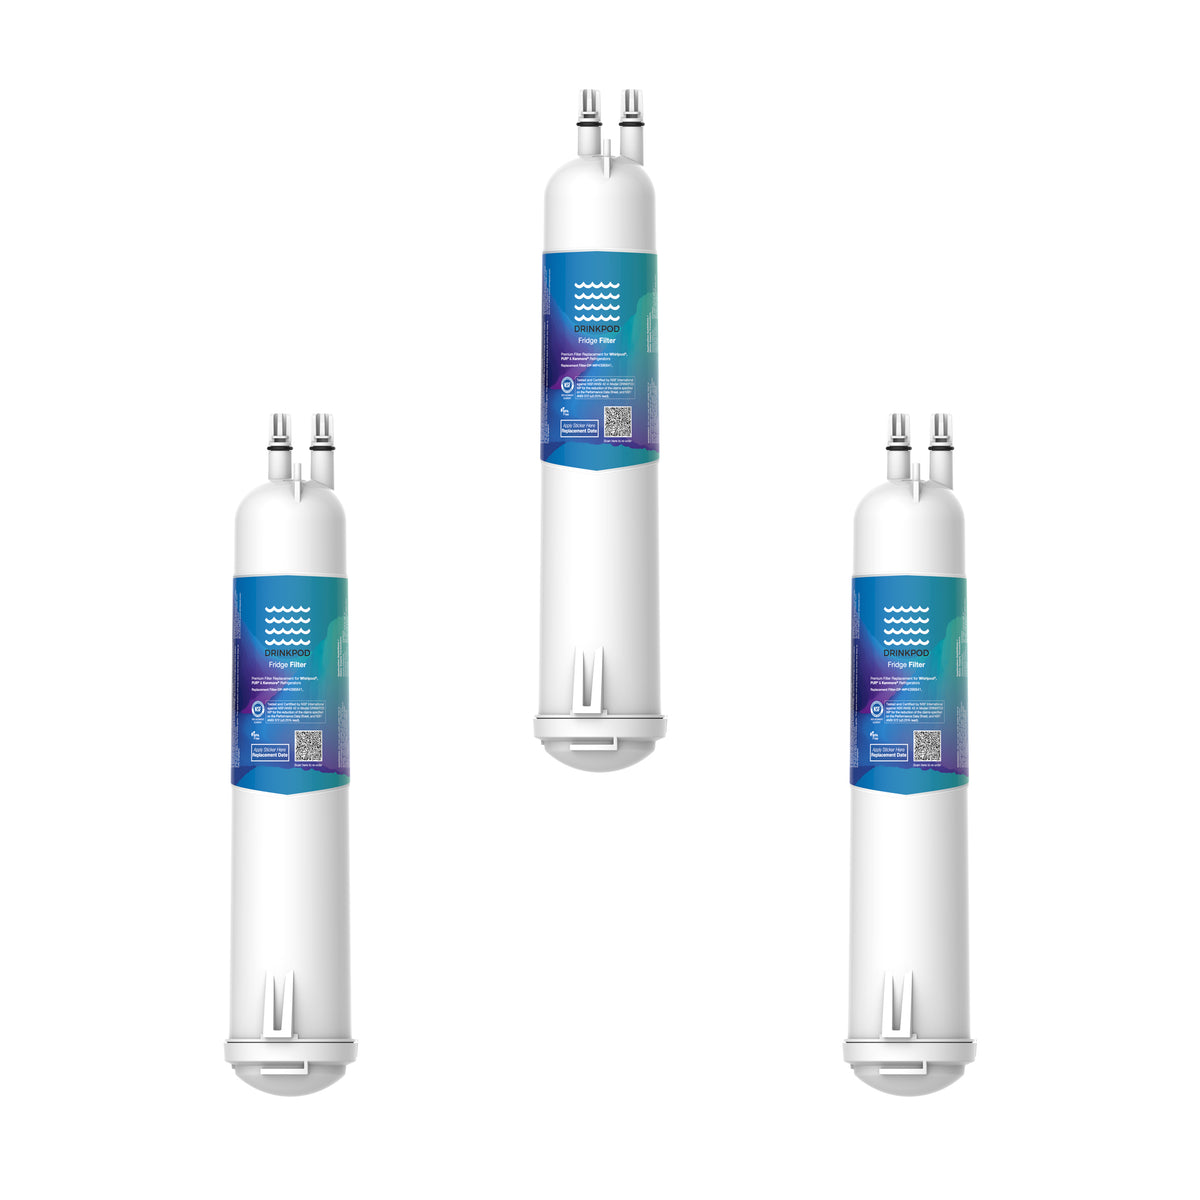 DRINKPOD 4396841 Refrigerator Water Filter Compatible with EDR3RXD1, 4396841, 4396710, Filter 3, 46-9083,46-9030, 9030, 9083 Refrigerator Water Filter